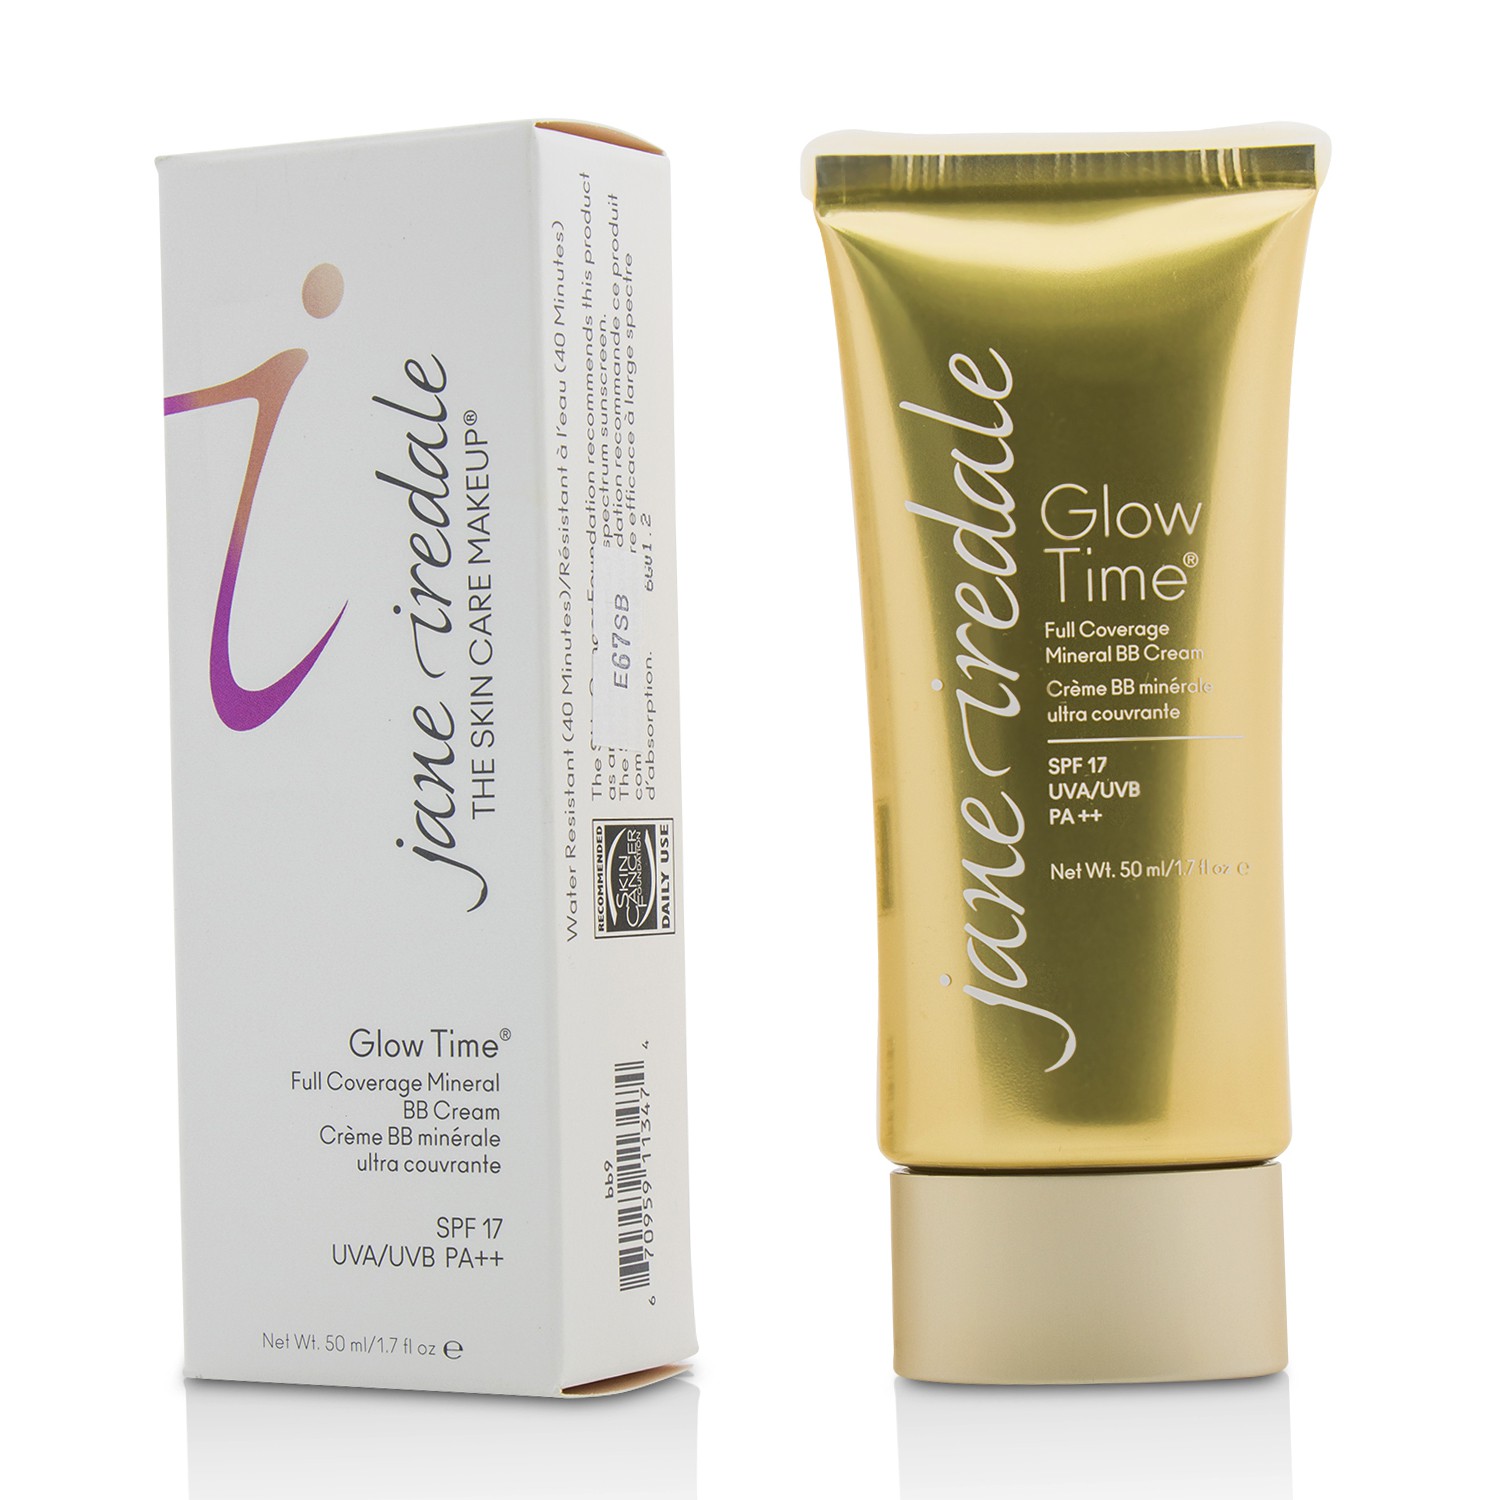 Glow Time Full Coverage Mineral BB Cream SPF 17 - BB9 Jane Iredale Image